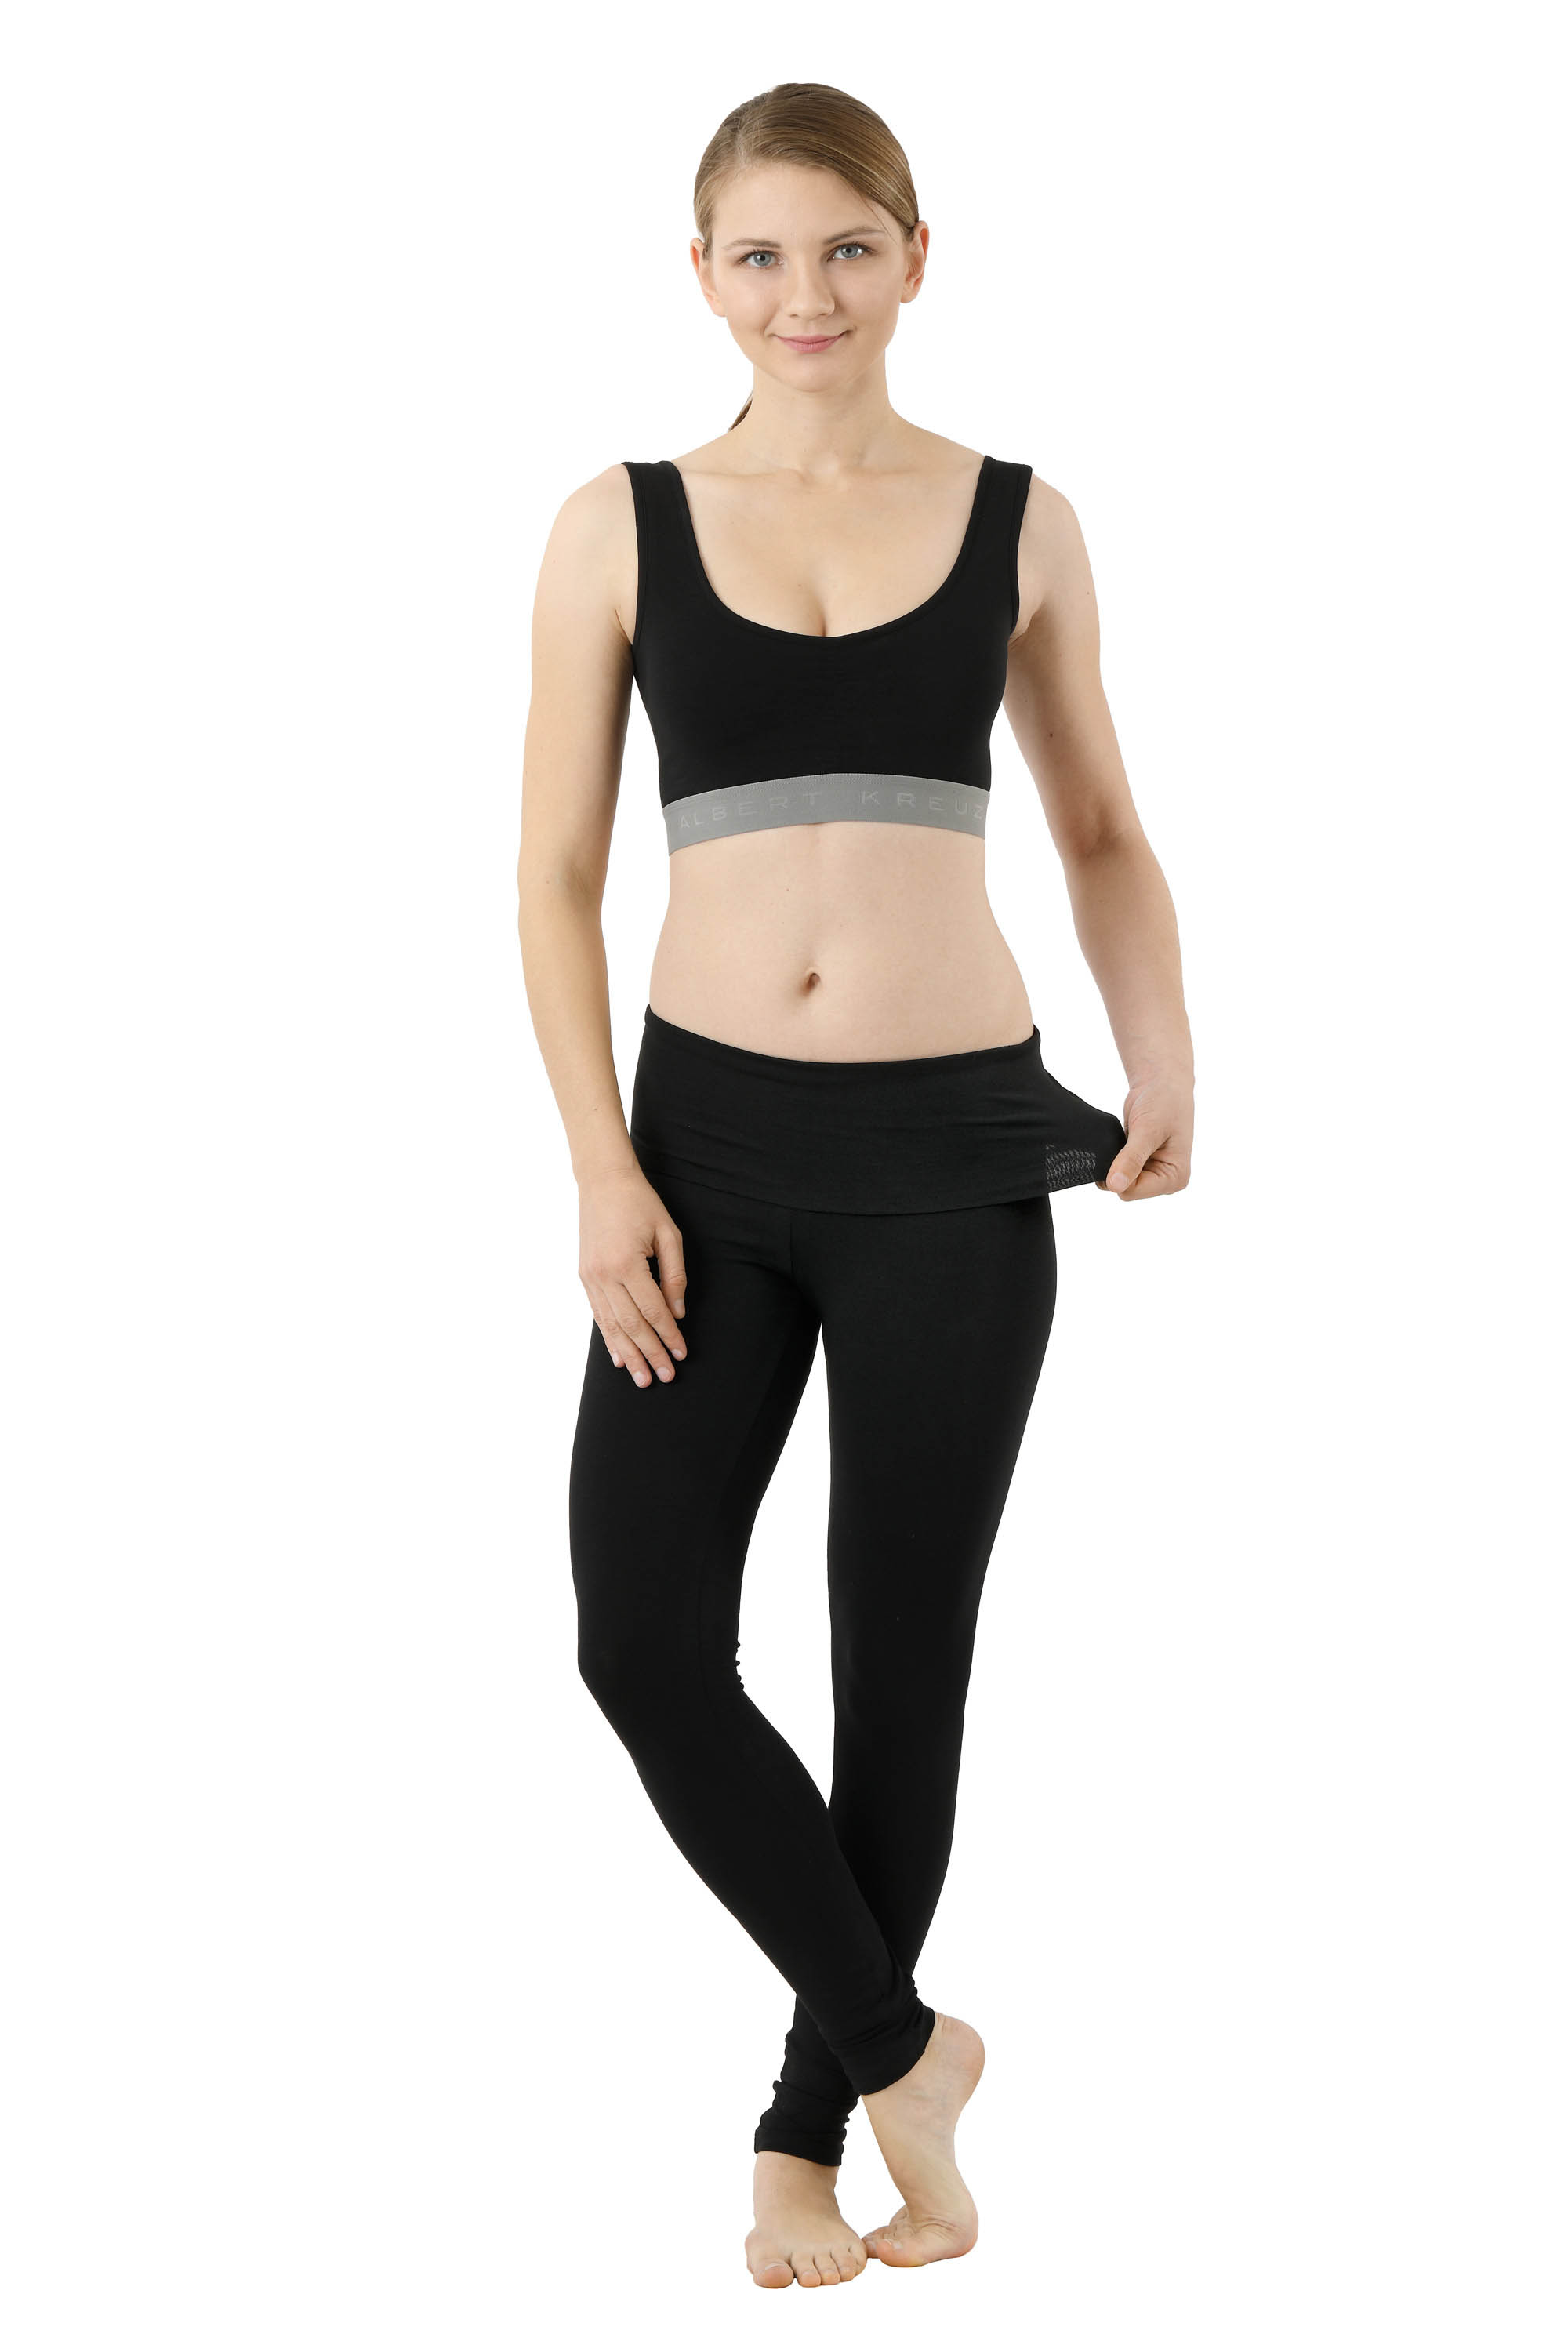 Stretch is Comfort Women's Foldover Yoga Pant